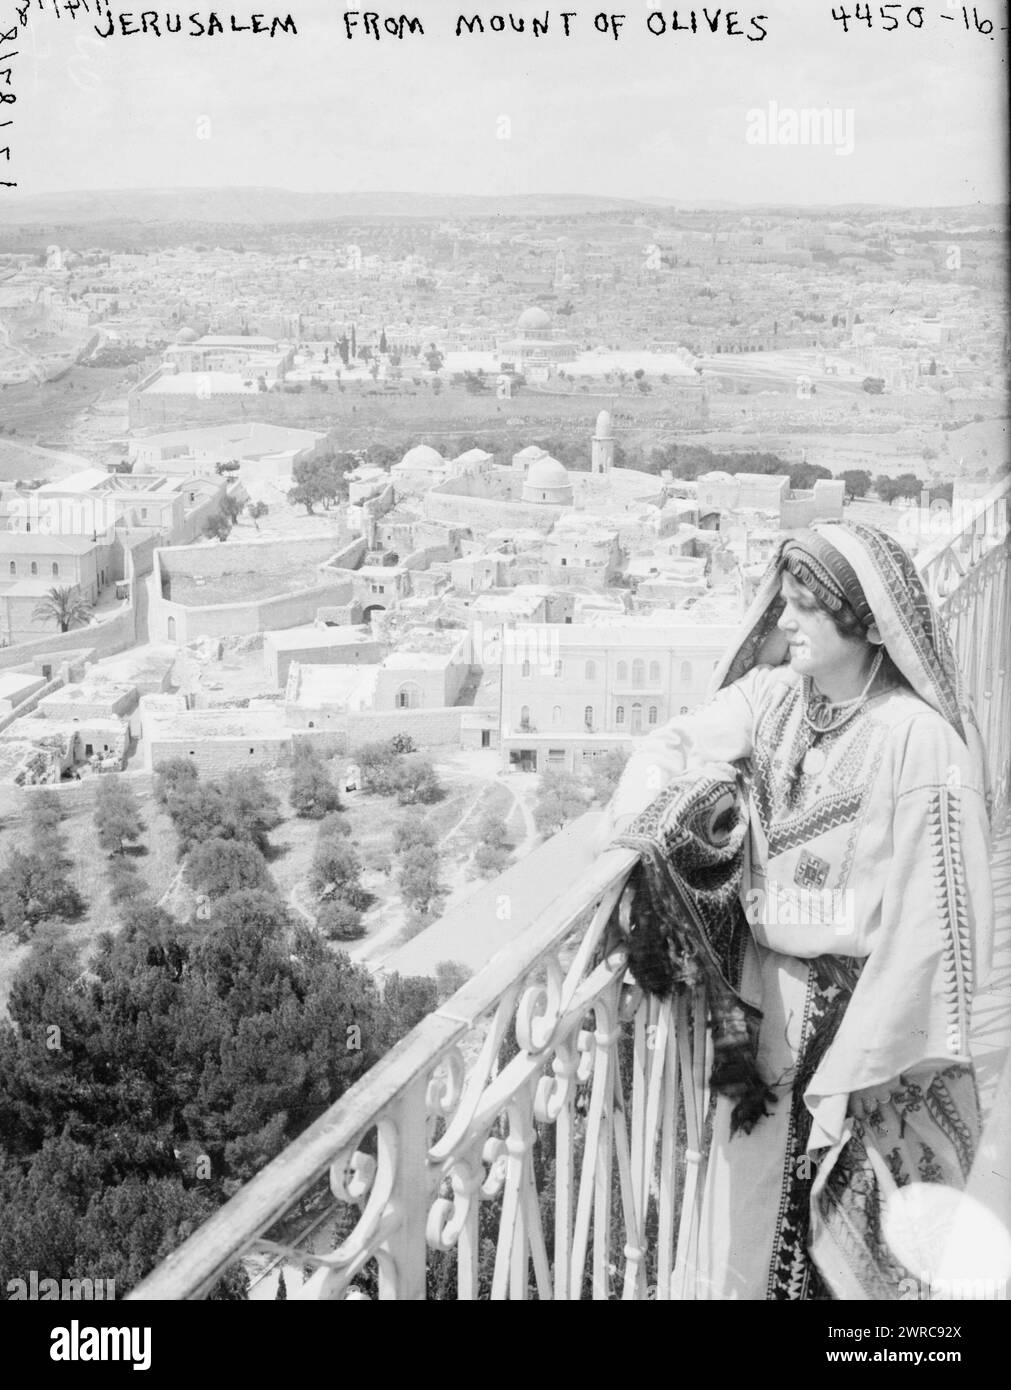 Jerusalem from Mount of Olives, Photograph shows a woman in a traditional embroidered Palestinian dress and headdress, standing on balcony on the Mount of Olives overlooking Jerusalem., 1918 Jan. 14, Jerusalem, Glass negatives, 1 negative: glass Stock Photo